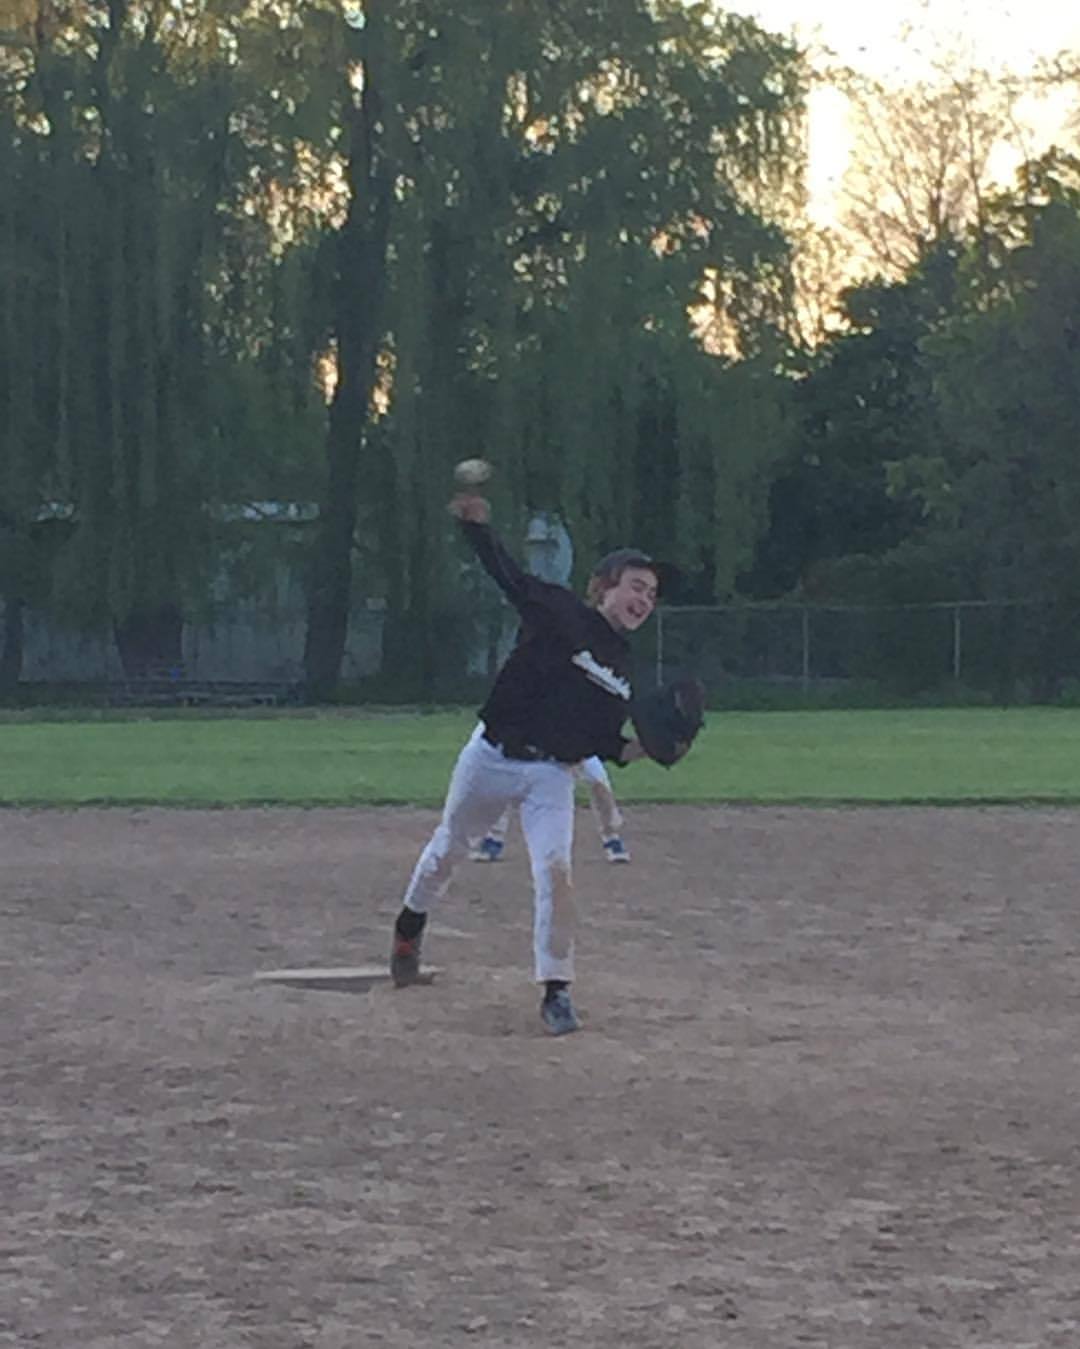 (Rochester, NY) - Southside Joywaves bats exploded tonight in a 15-7 win over the Southside Tigers, avenging their opening day loss. Aidan Morris (pictured) went 3-3 with two triples and pitched 4 shutout innings for the win. Robbie Yates went 3-5...